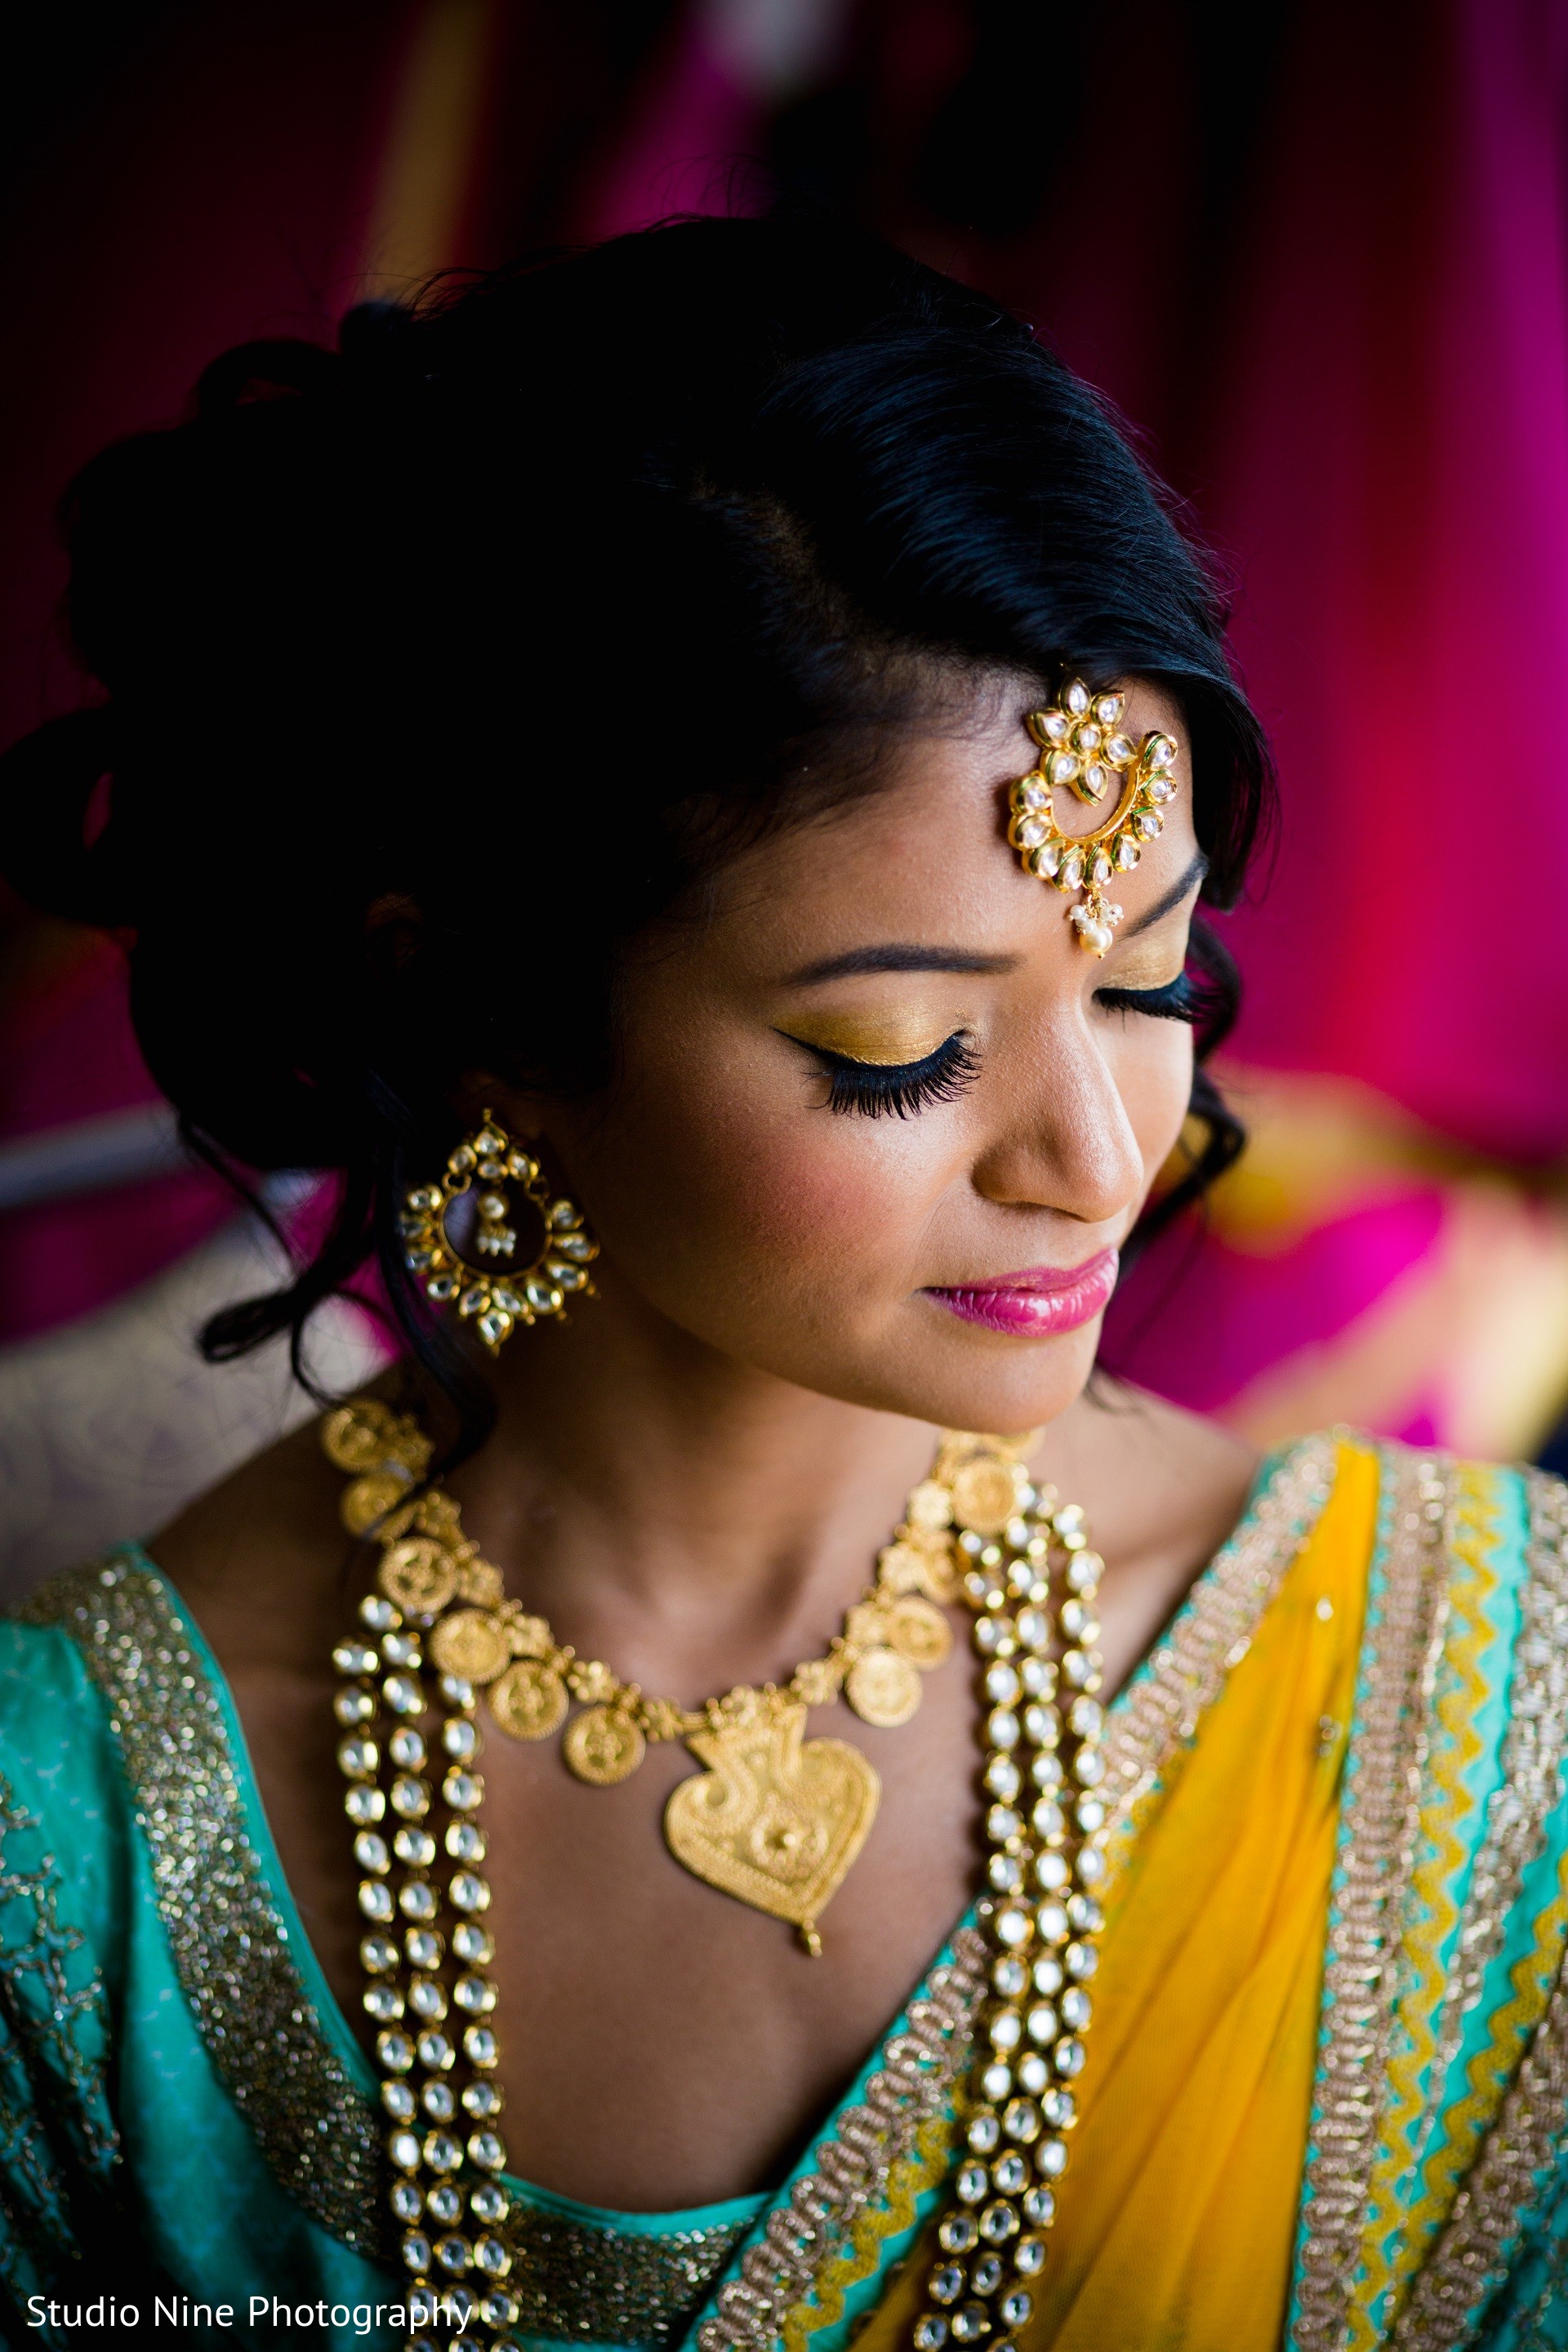 Indian Bridal Portraits (with a twist) — Nandish Desai Photography